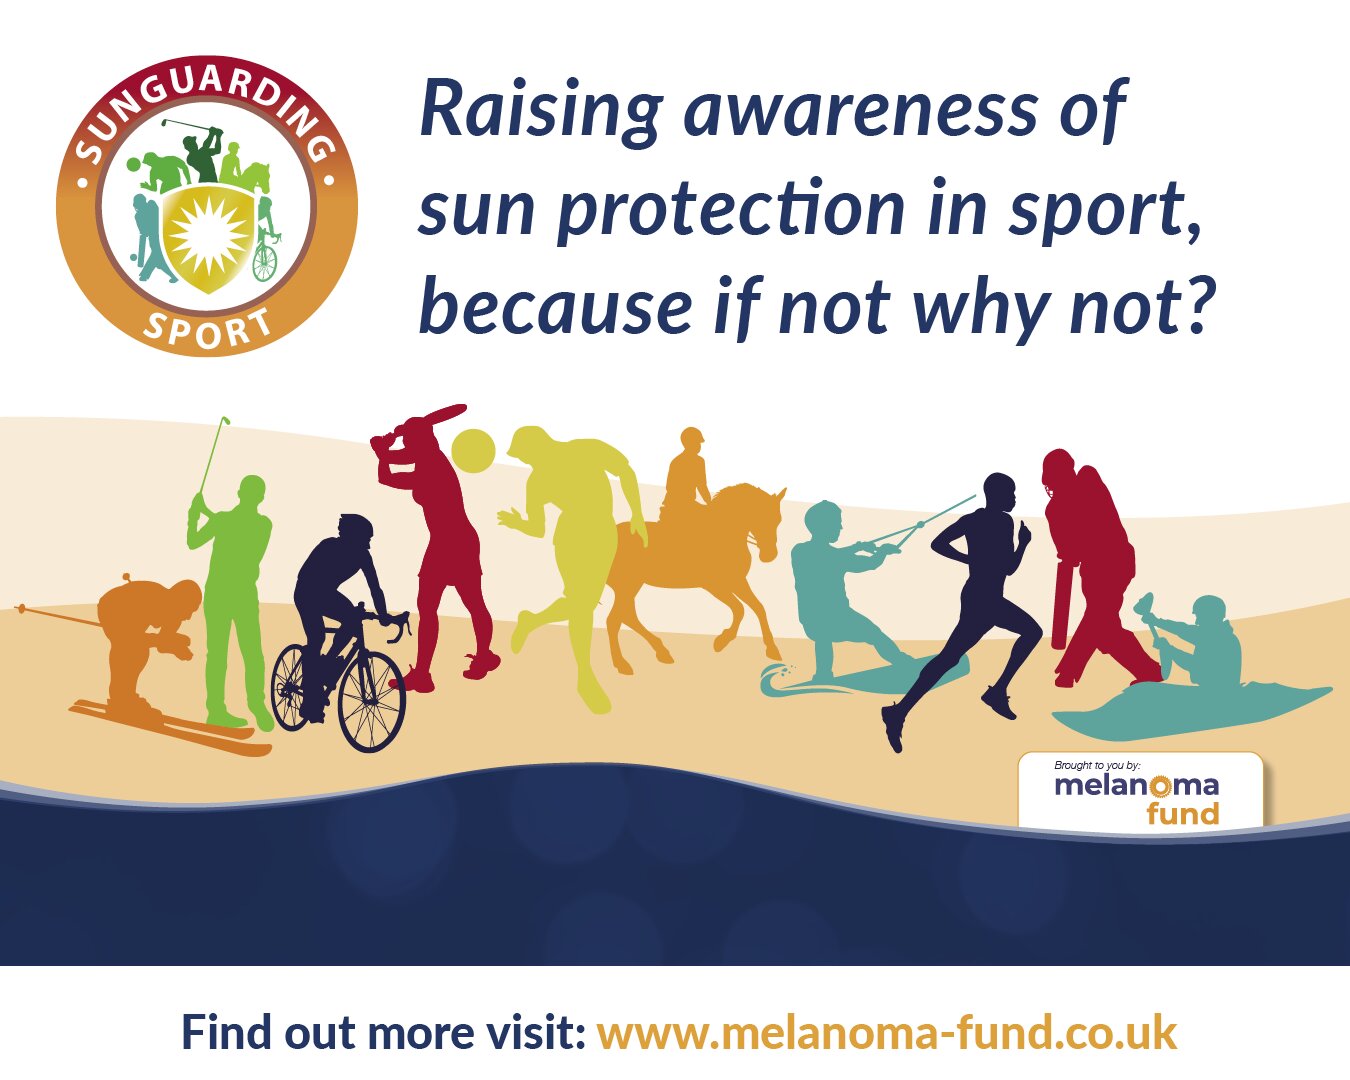 Stay sun safe at the archery range with the Melanoma Fund